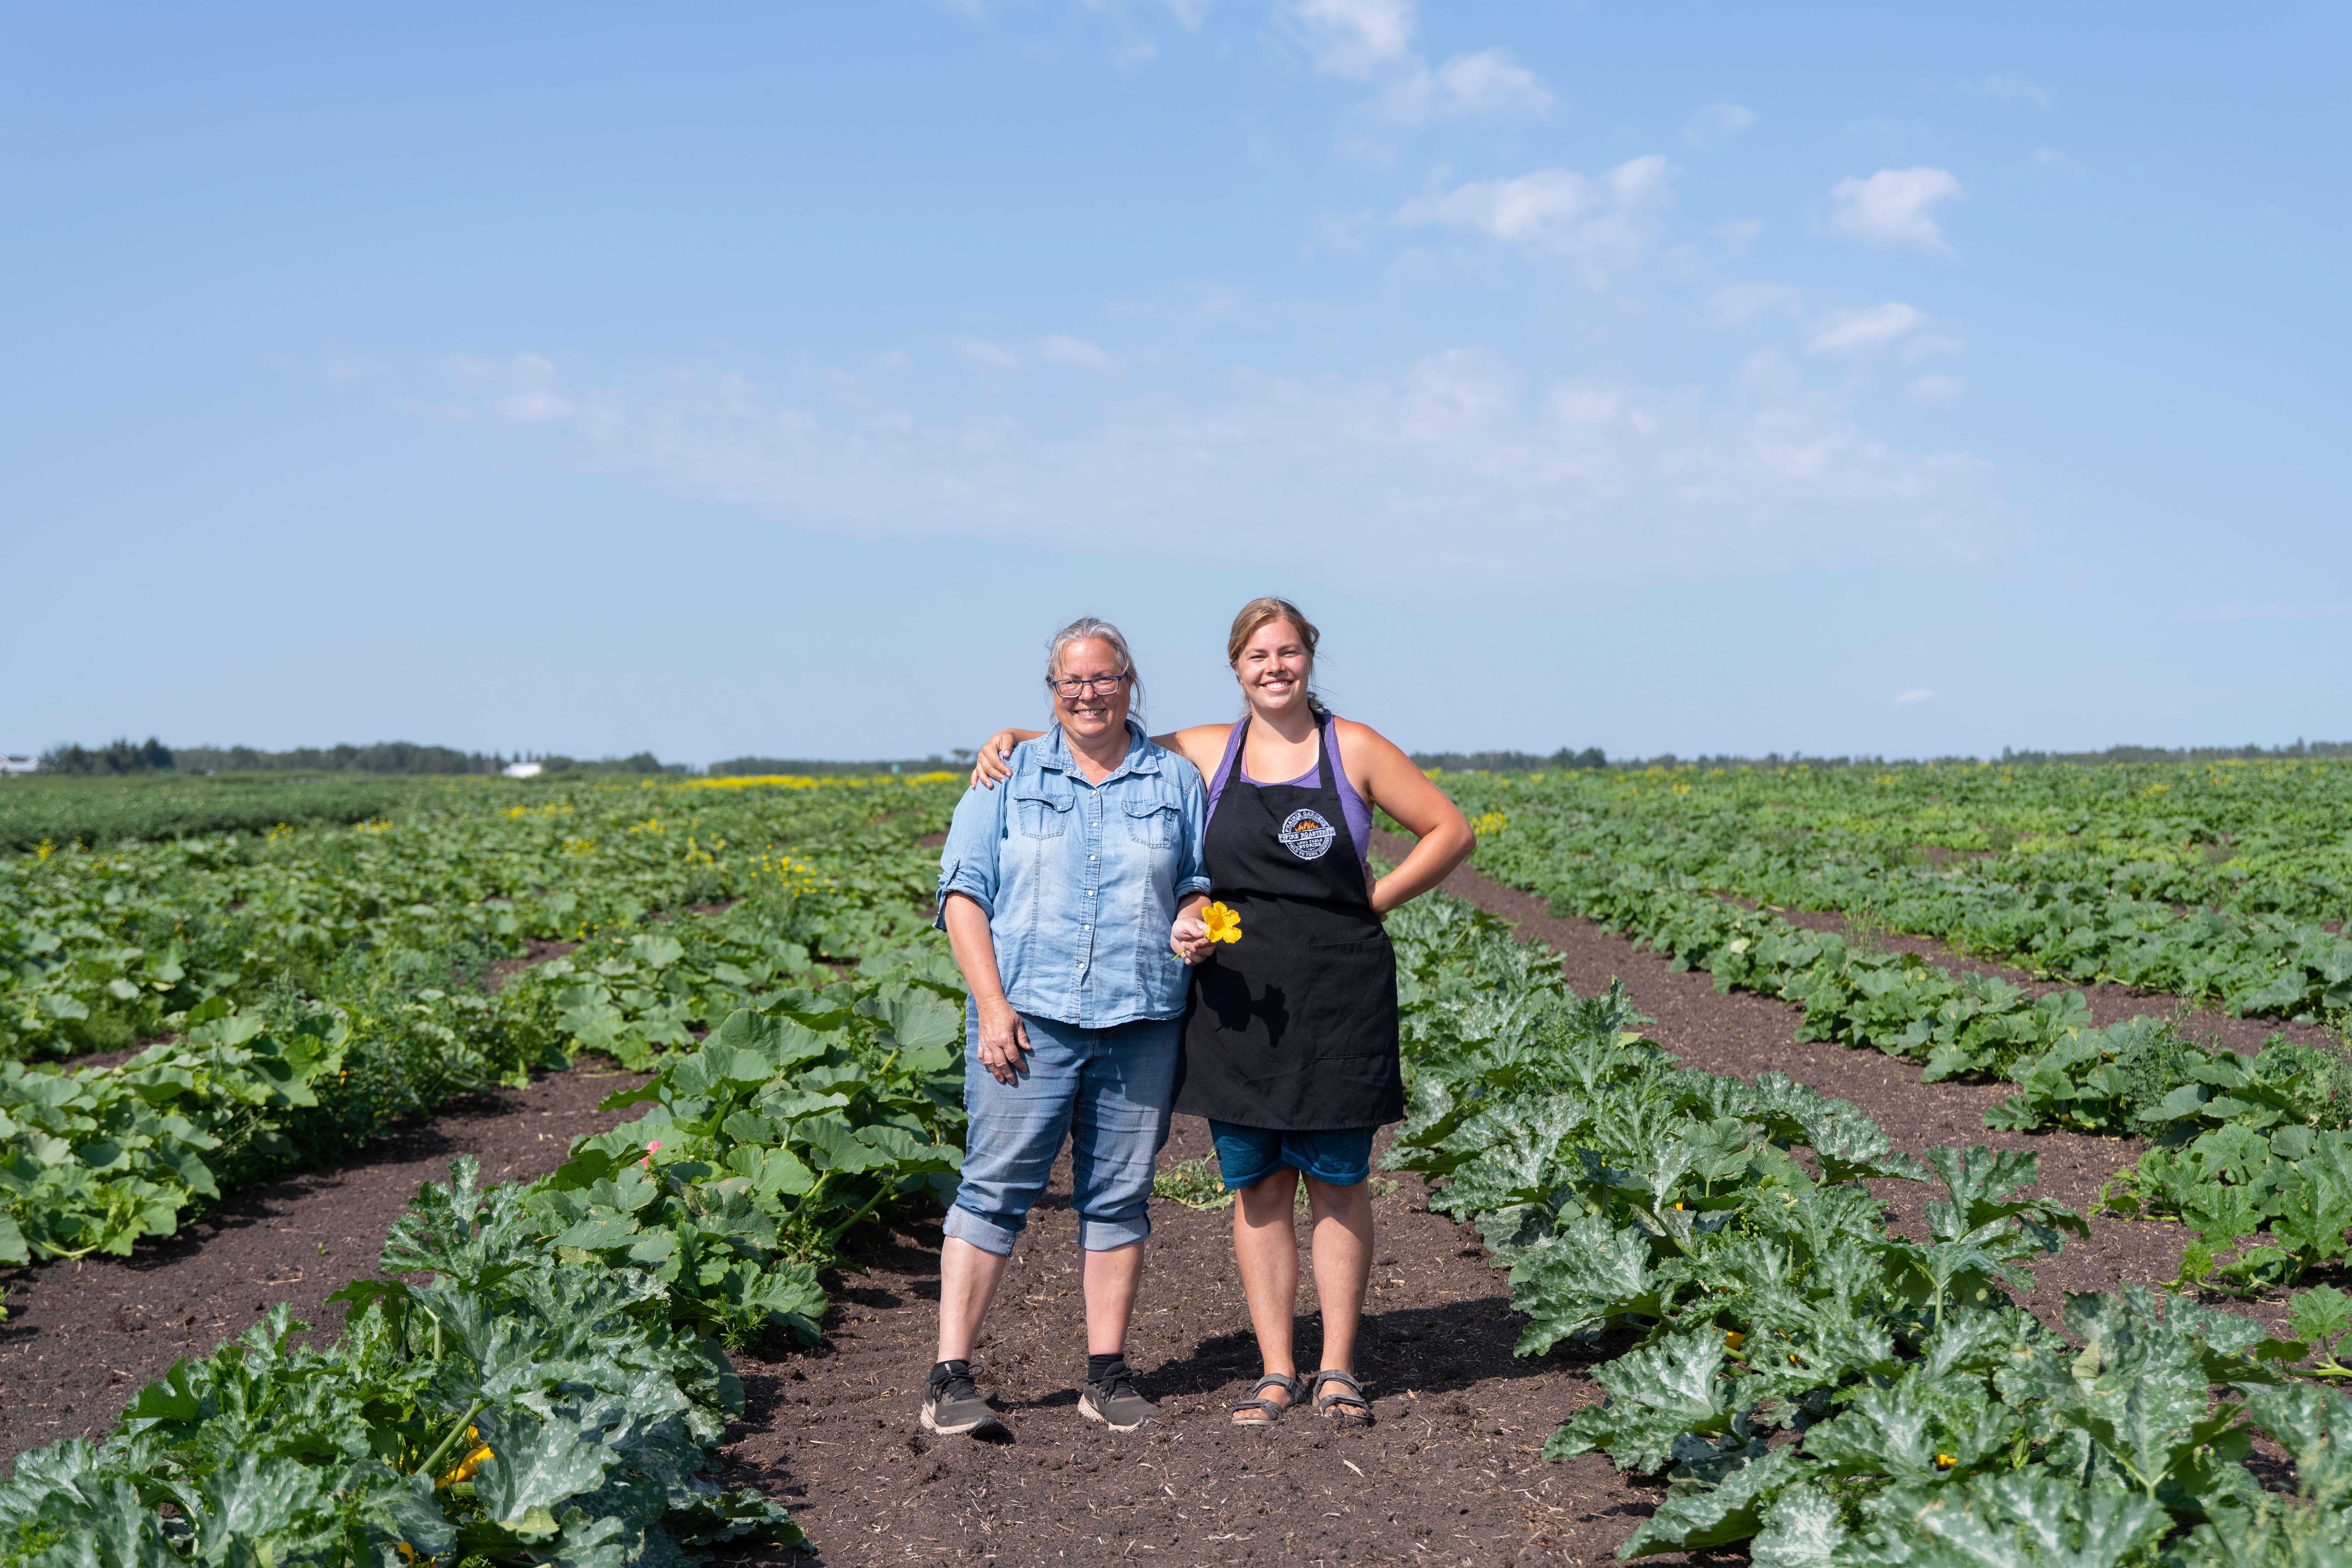 Growing Meaningful Tourism on an Alberta Farm